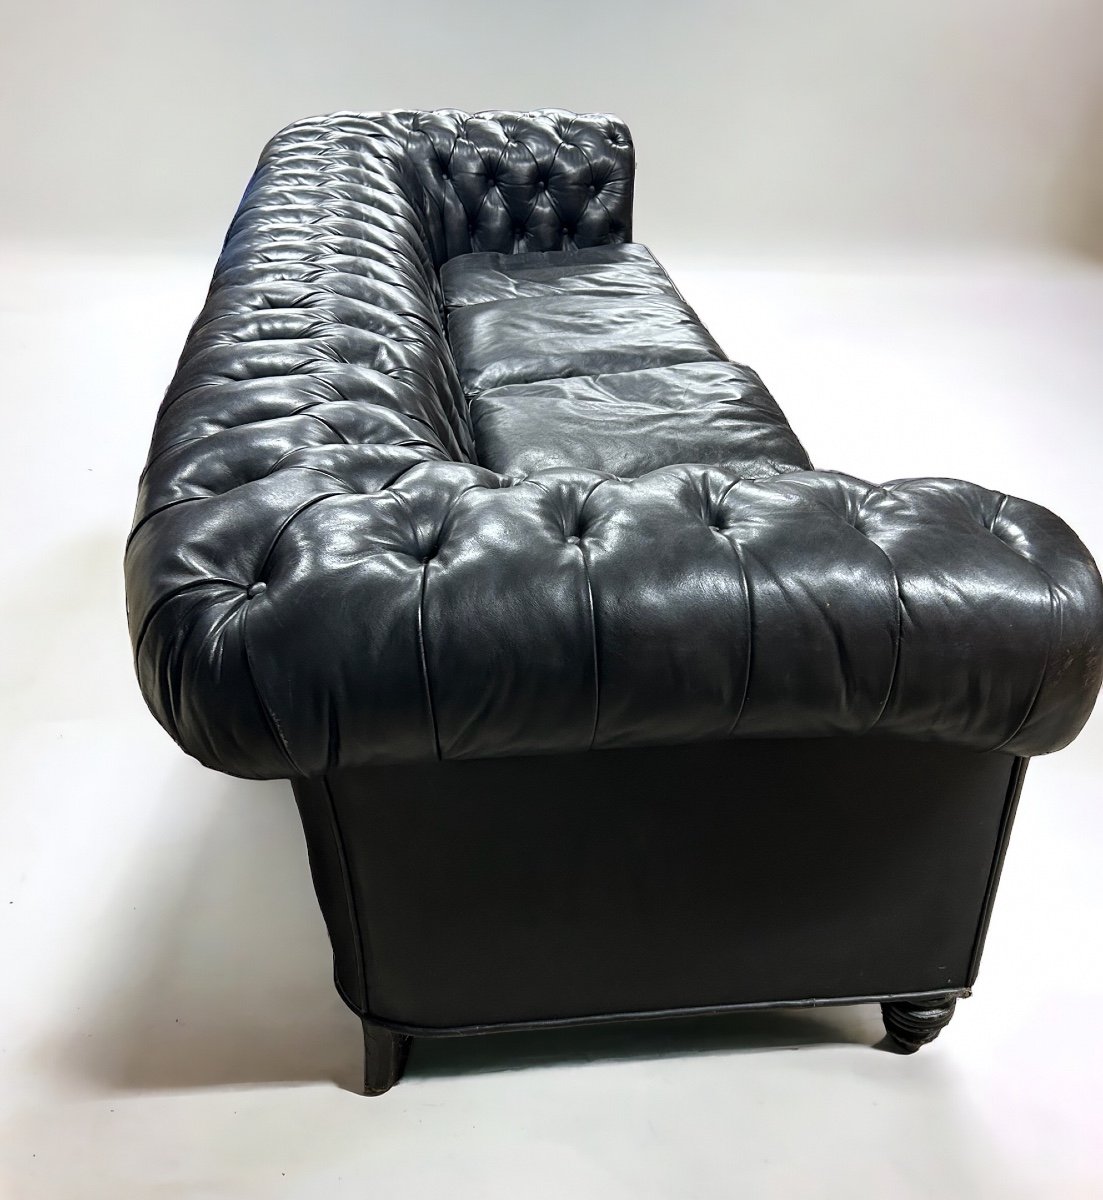 Large And Old Four-seater Leather Chesterfield Sofa Early 20th Century L 260 Cm-photo-1